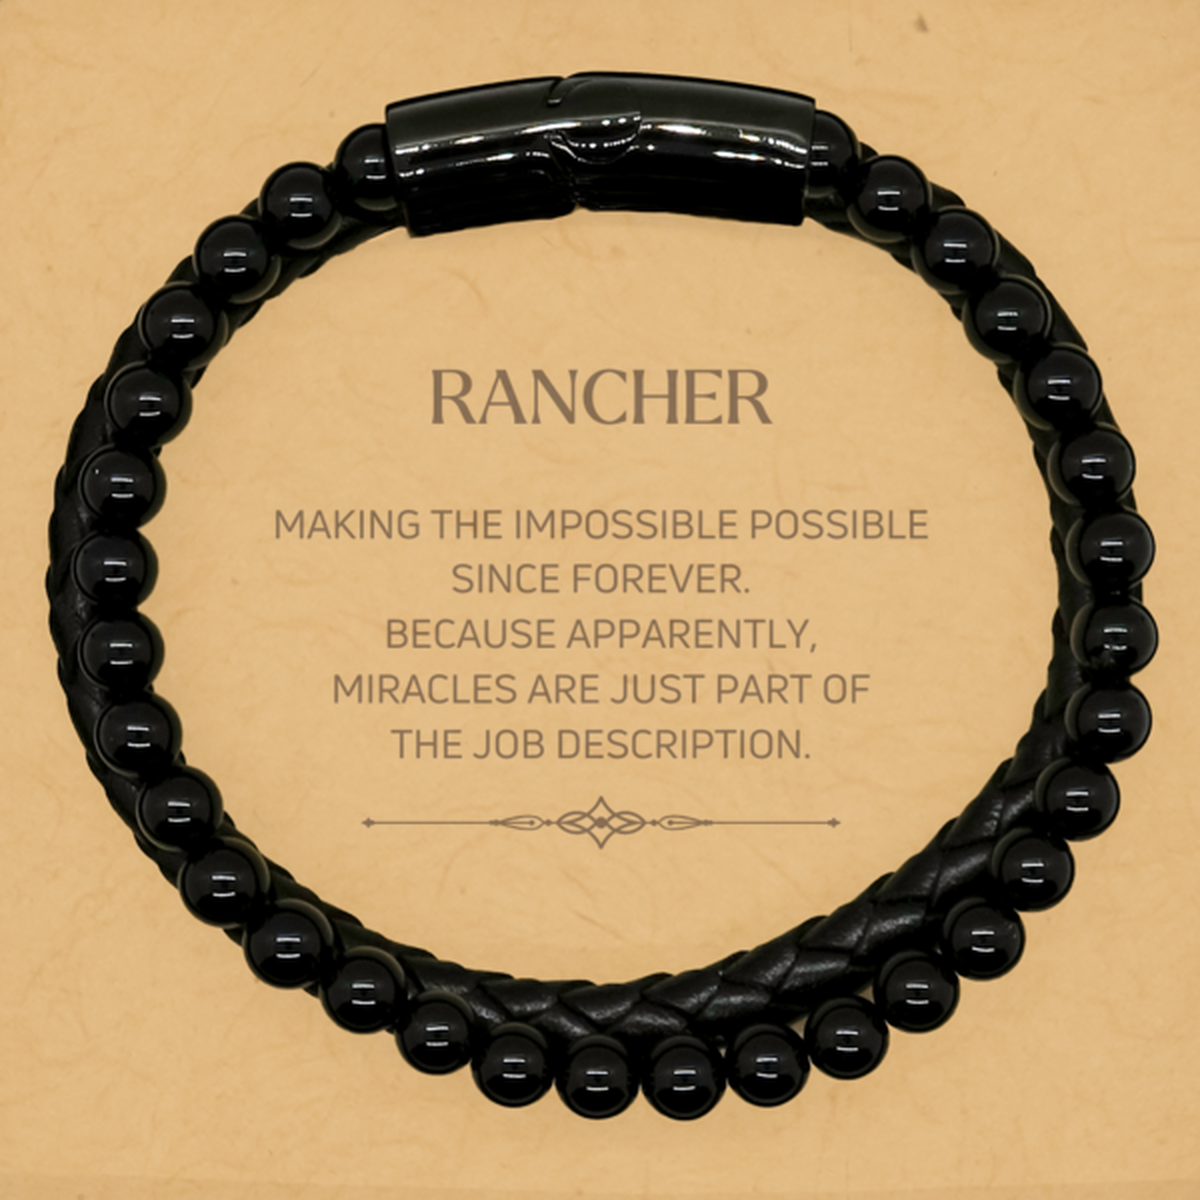 Funny Rancher Gifts, Miracles are just part of the job description, Inspirational Birthday Stone Leather Bracelets For Rancher, Men, Women, Coworkers, Friends, Boss